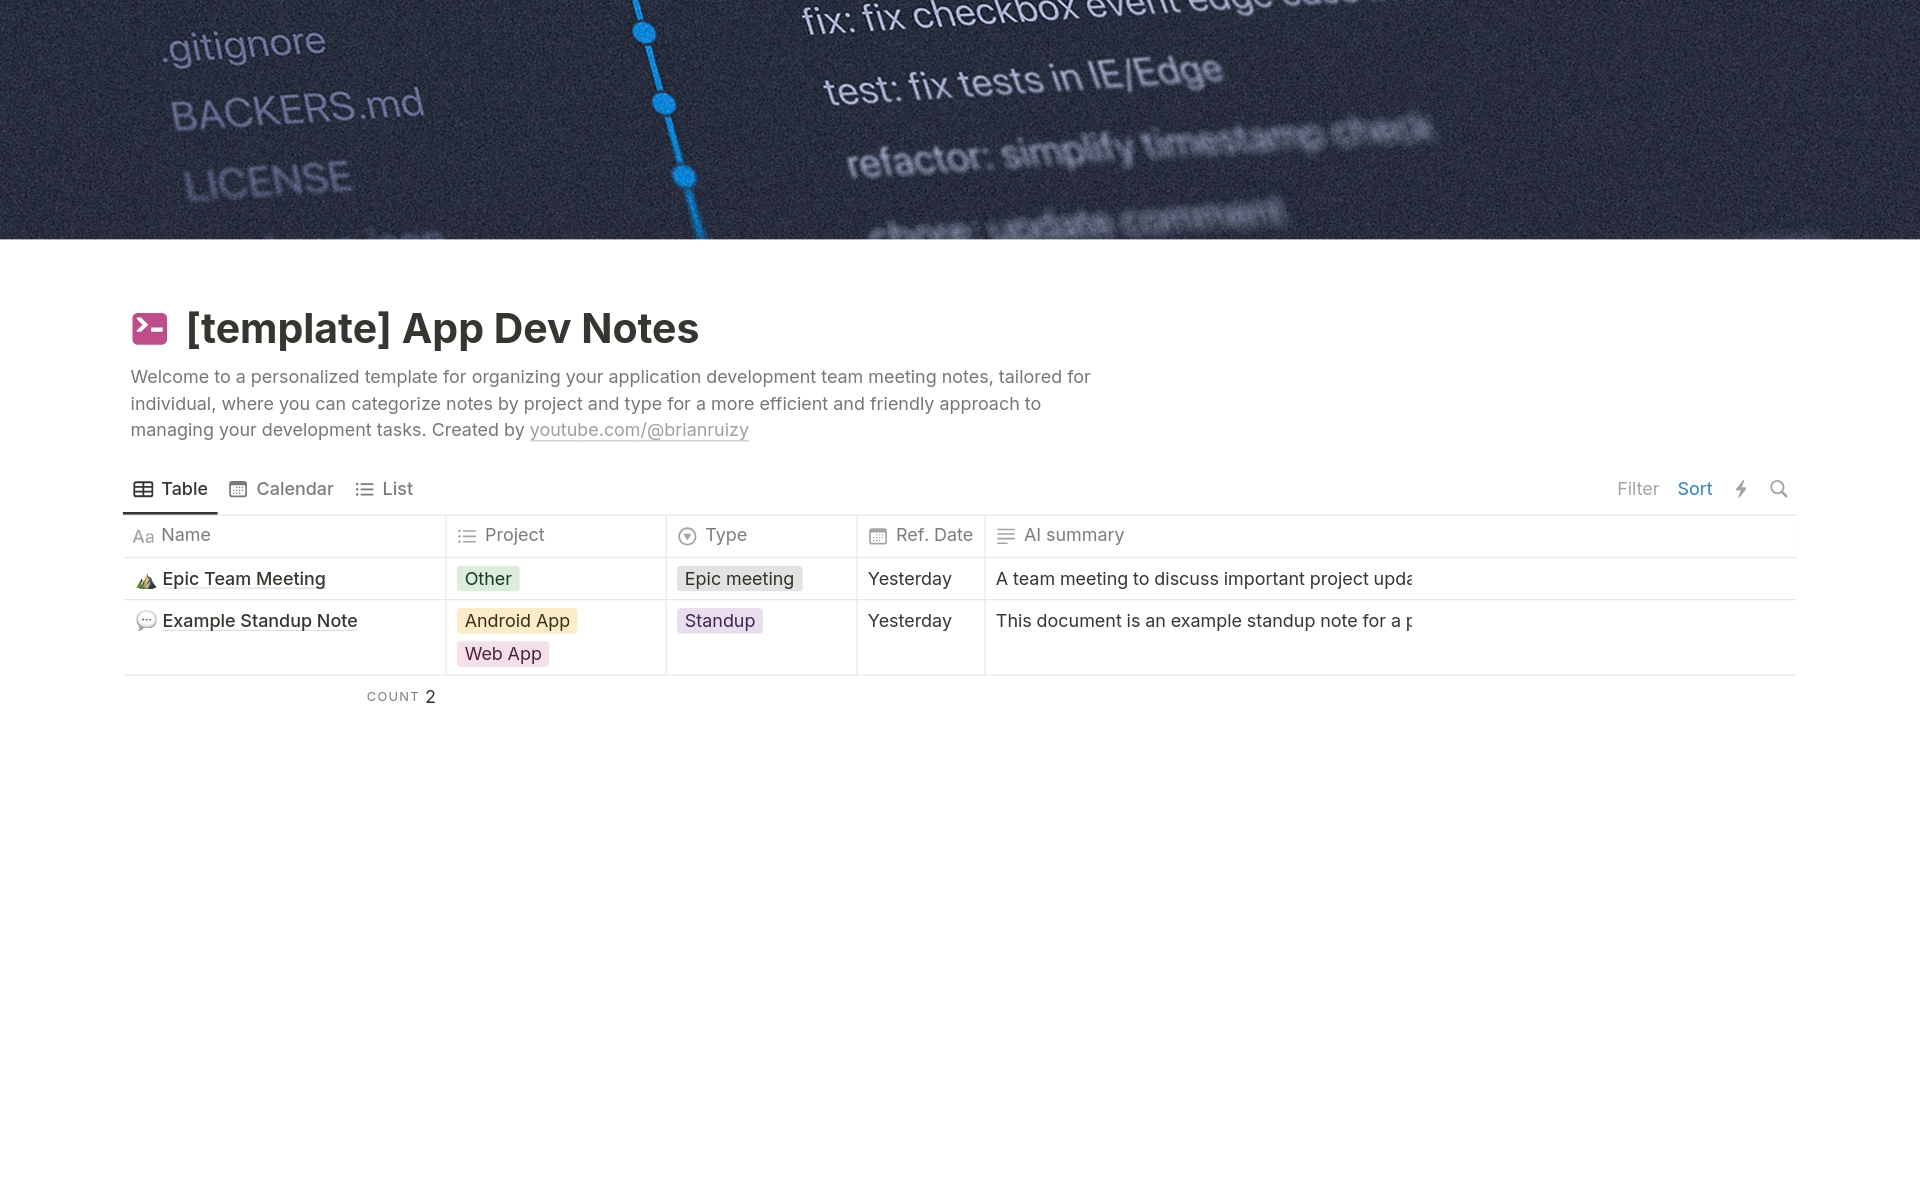 a personalized template for organizing your application development team meeting notes, tailored for individual, where you can categorize notes by project and type for a more efficient and friendly approach to managing your development tasks. Created by youtube.com/@brianruizy 